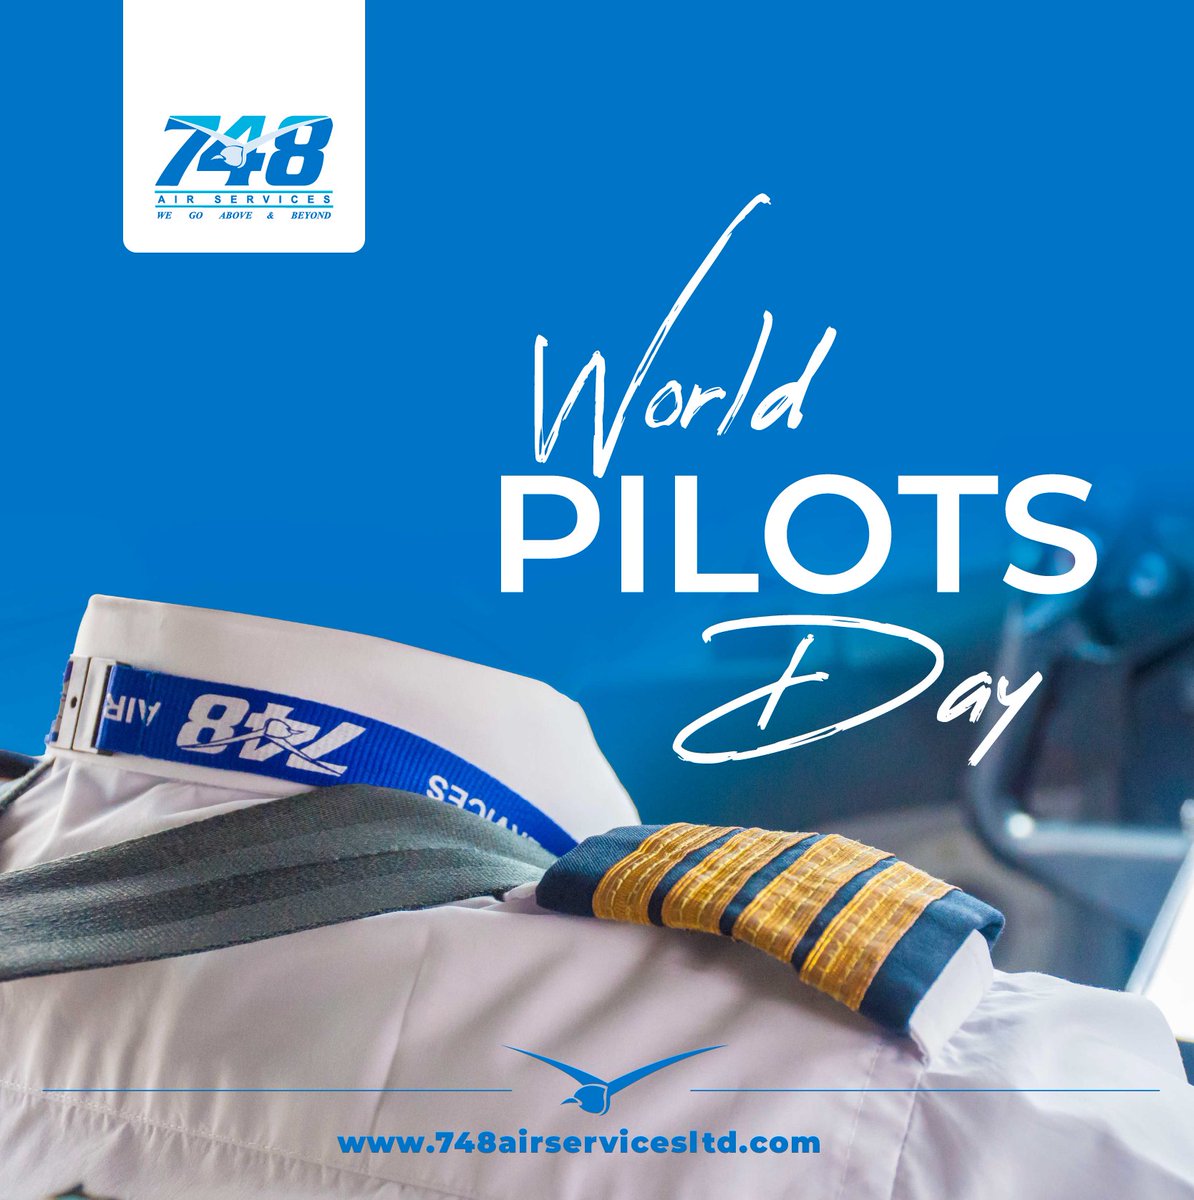 🎉 Happy World Pilots Day! 🛫 Today, we honor and celebrate the incredible dedication and skill of all pilots. Their commitment to safety and excellence is what keeps us soaring high and reaching new heights. To our amazing pilots, we salute you! 🙌